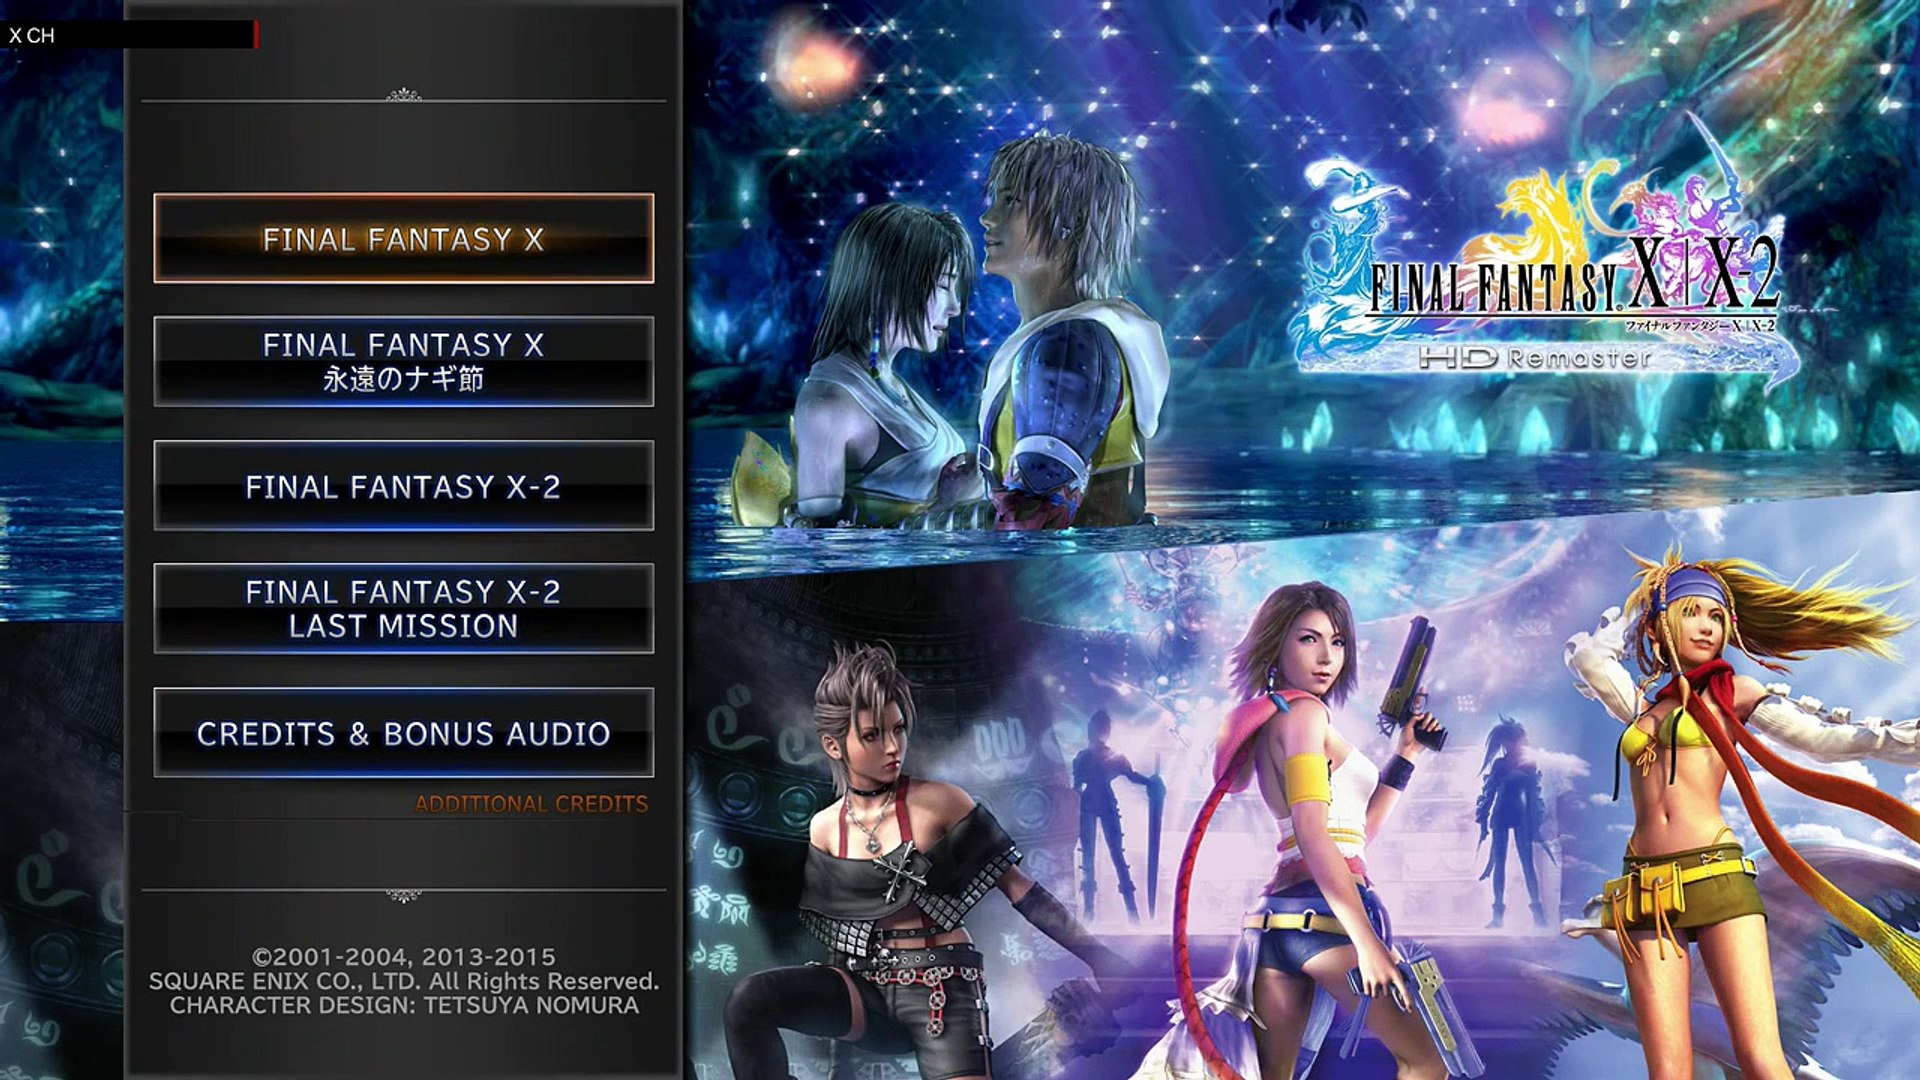 Ps4 Final Fantasy X Part1 Opening Ff10 Hd Remaster Dailymotion Video